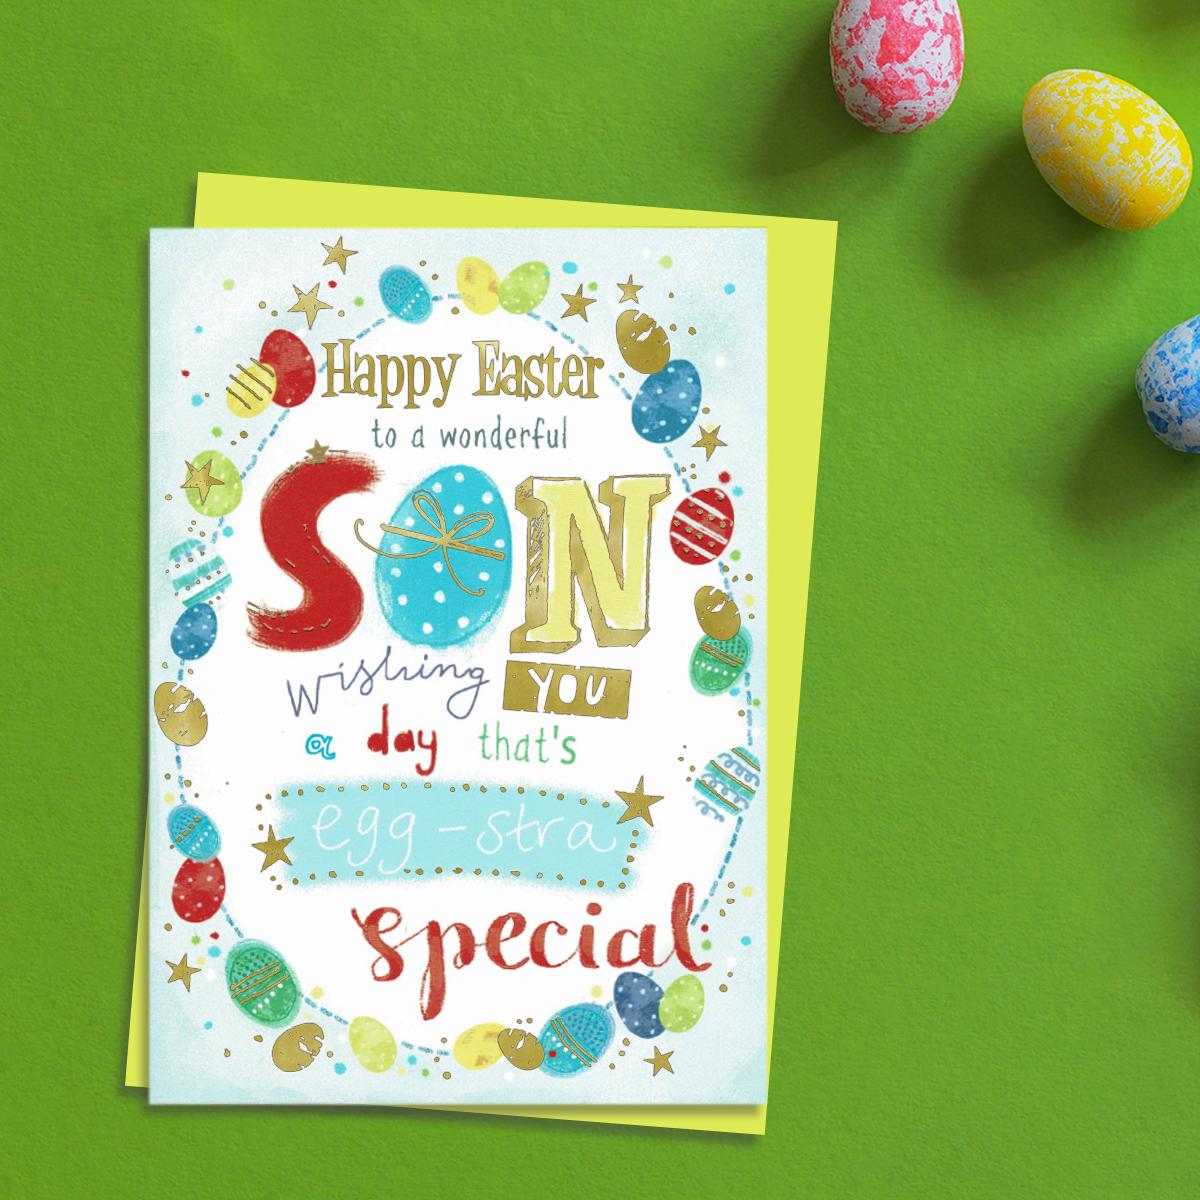 ' Happy Easter To A Wonderful Son' Card With added Gold Foil Detail. Complete With Yellow Envelope